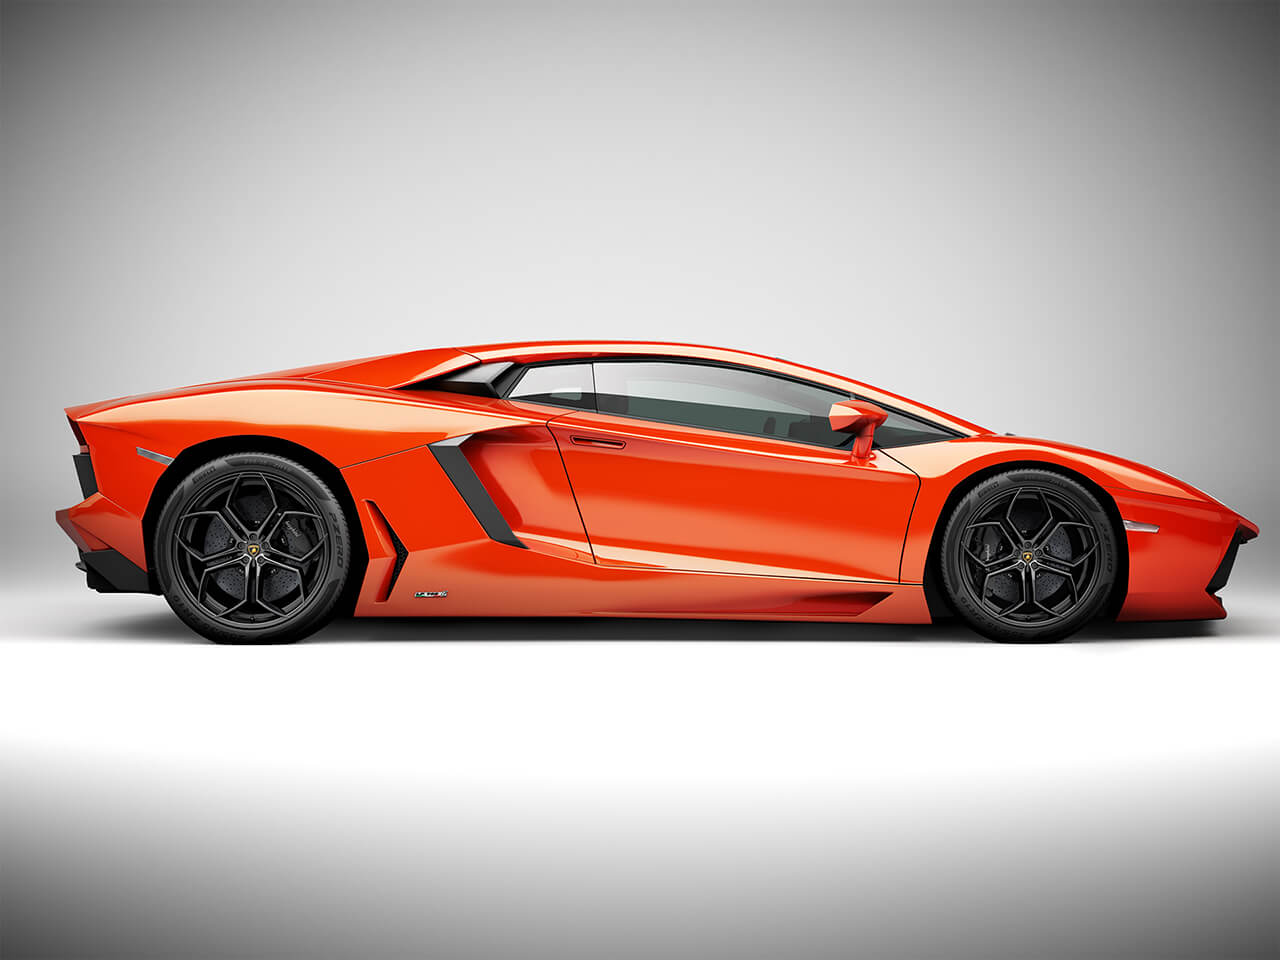 Computer generated image of a Lamborghini sports car painted orange side view